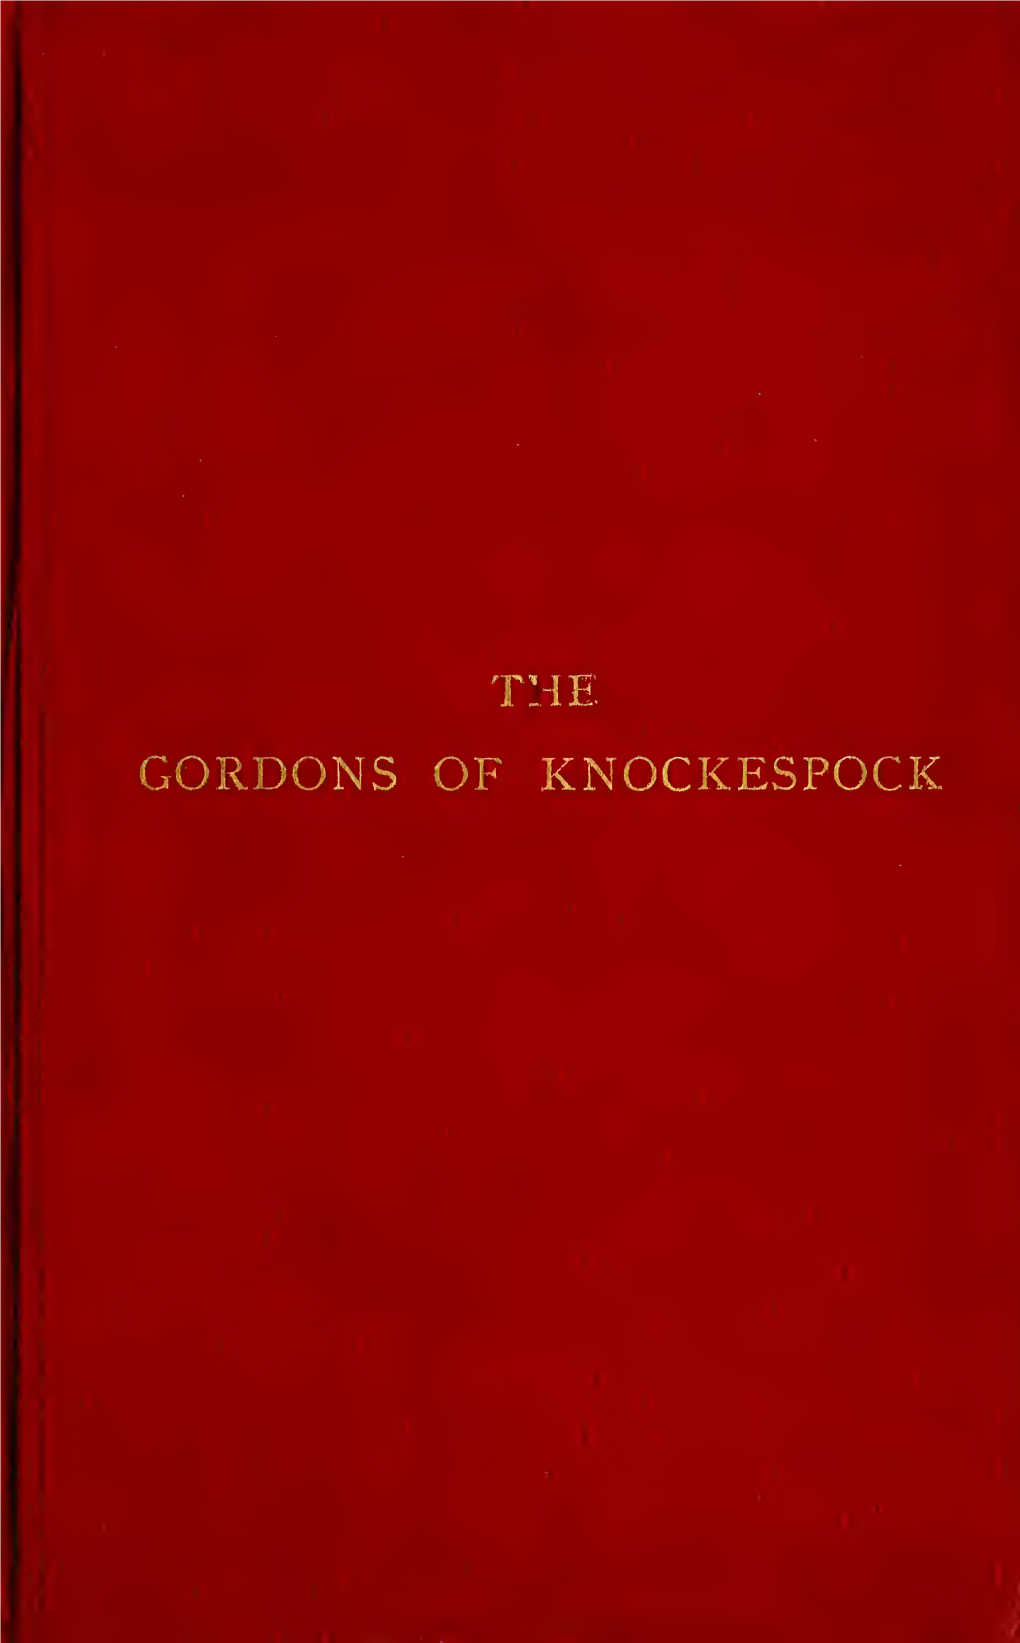 A Genealogical Account of the Family of Gordon of Knockespock / By